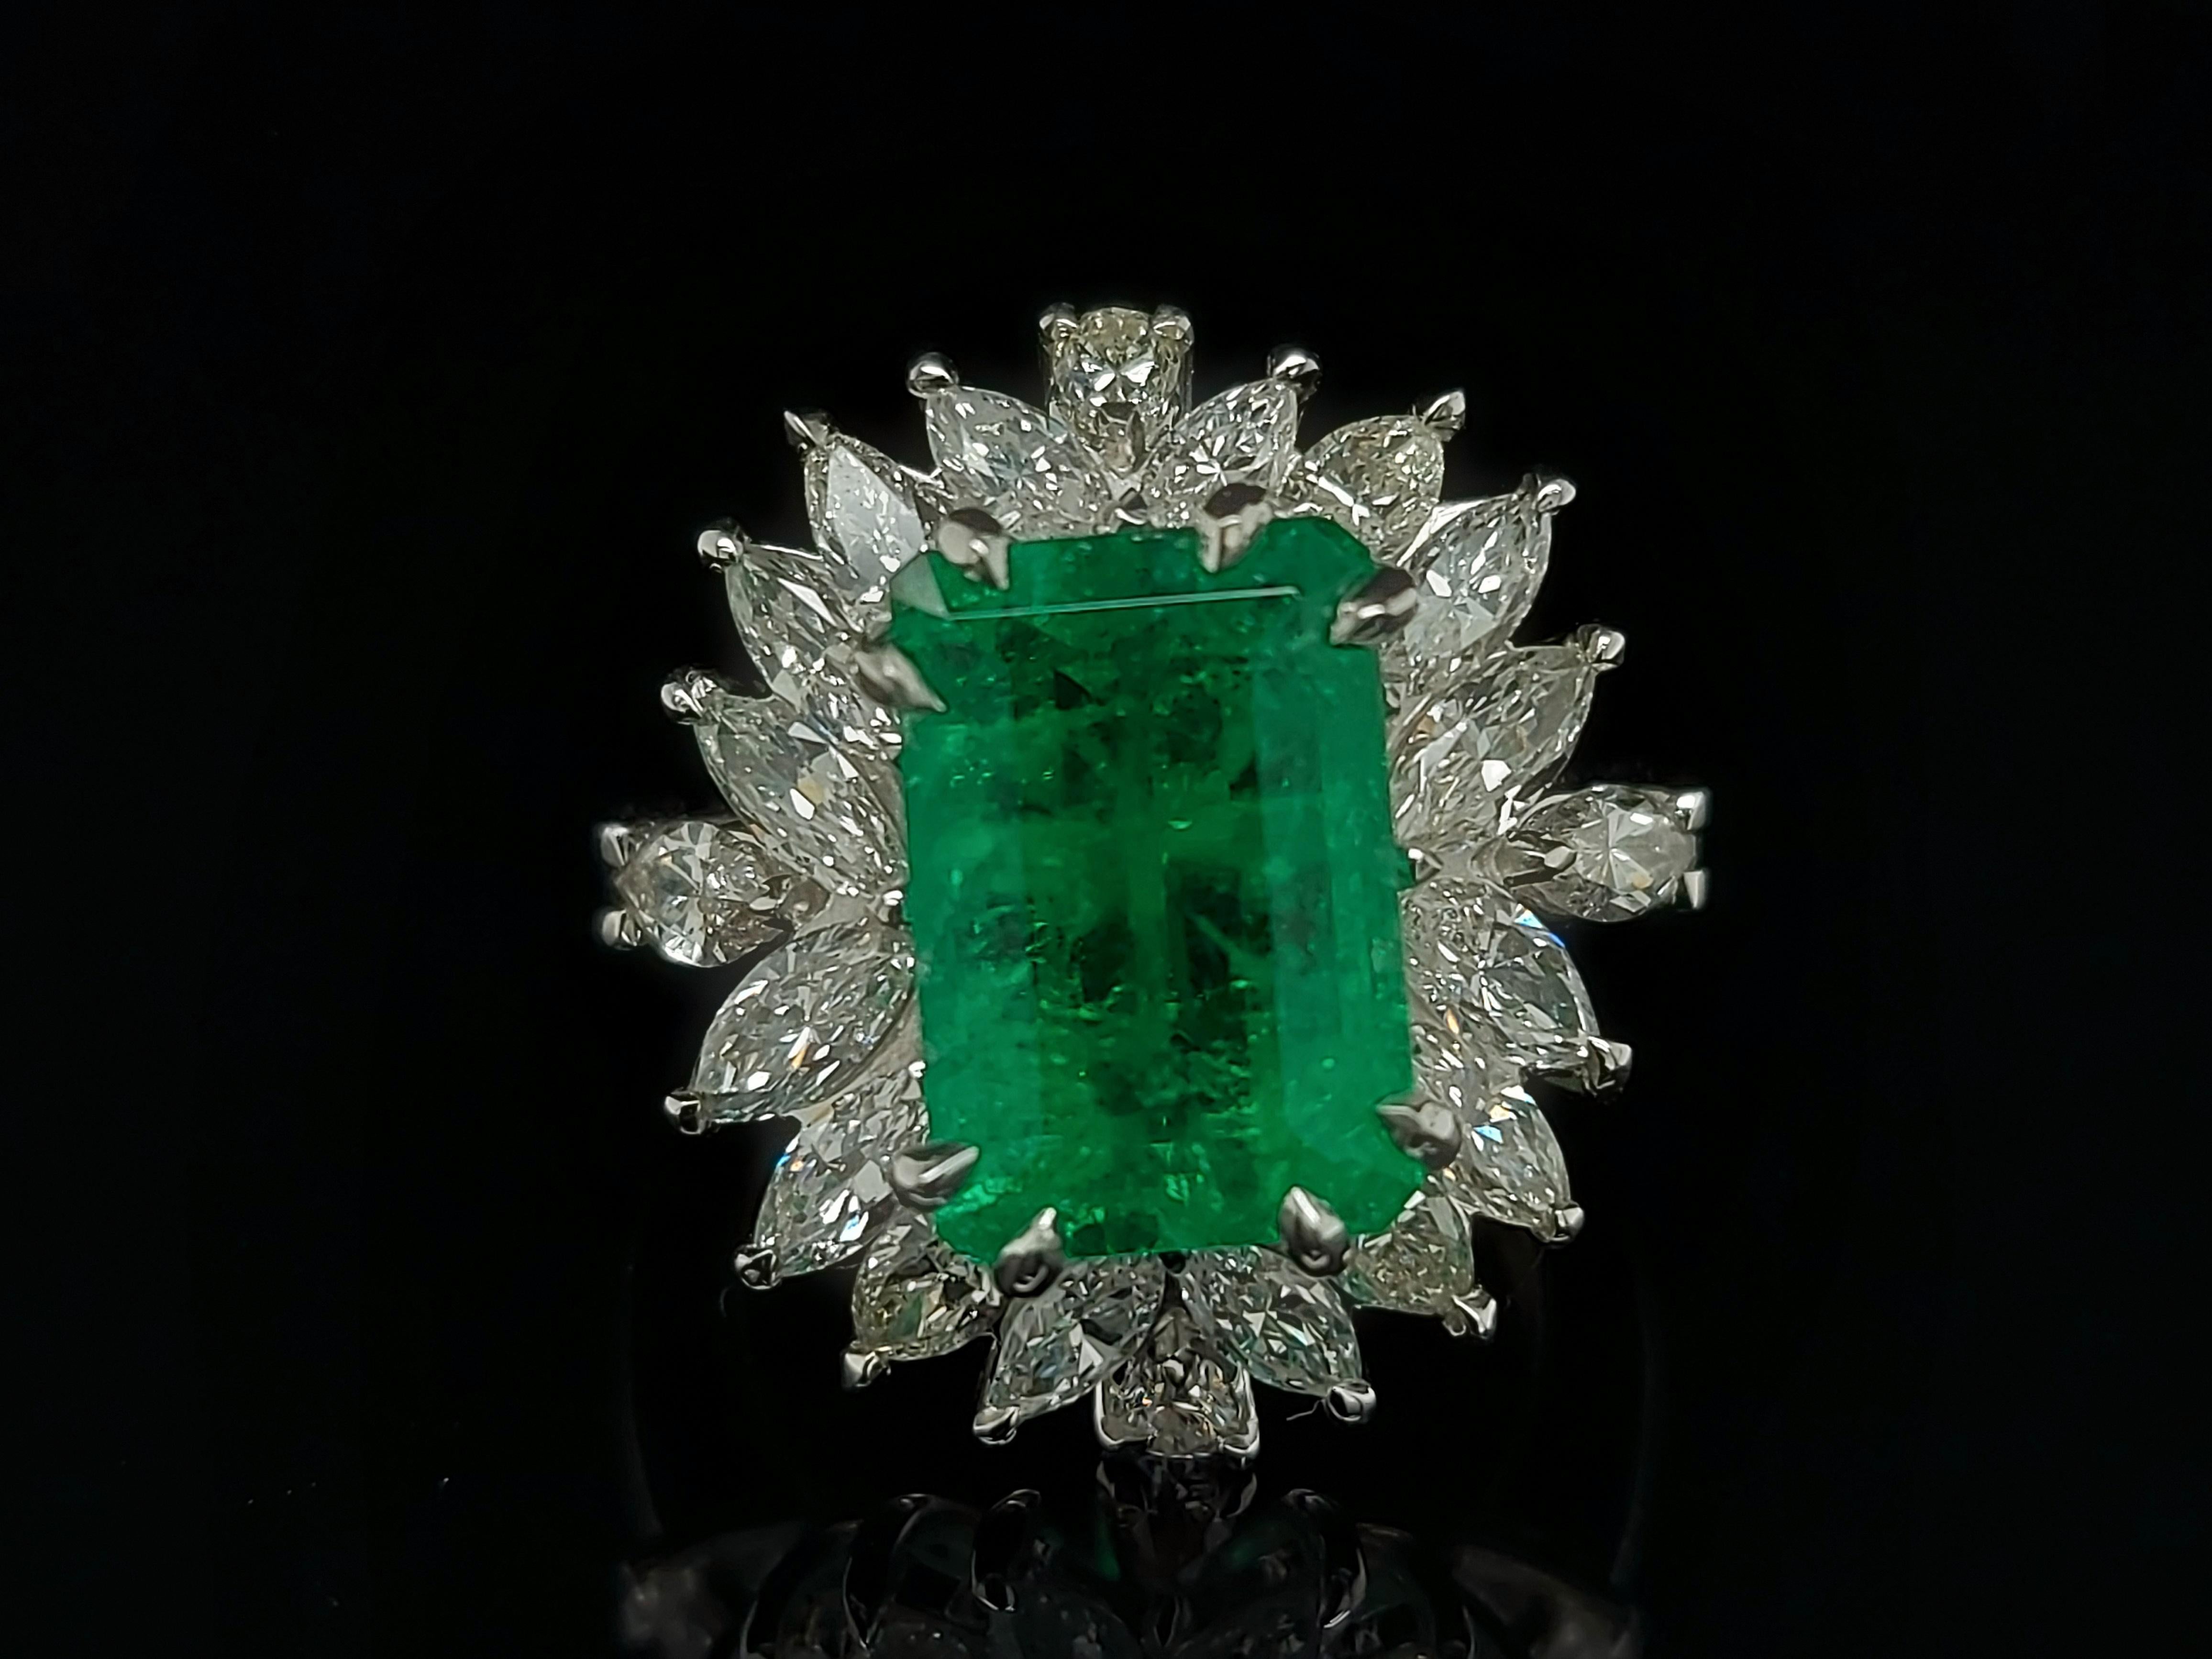 Artist Beautiful 18kt Handmade White Gold Ring4.36 Ct Colombia Emerald Minor&Diamonds For Sale